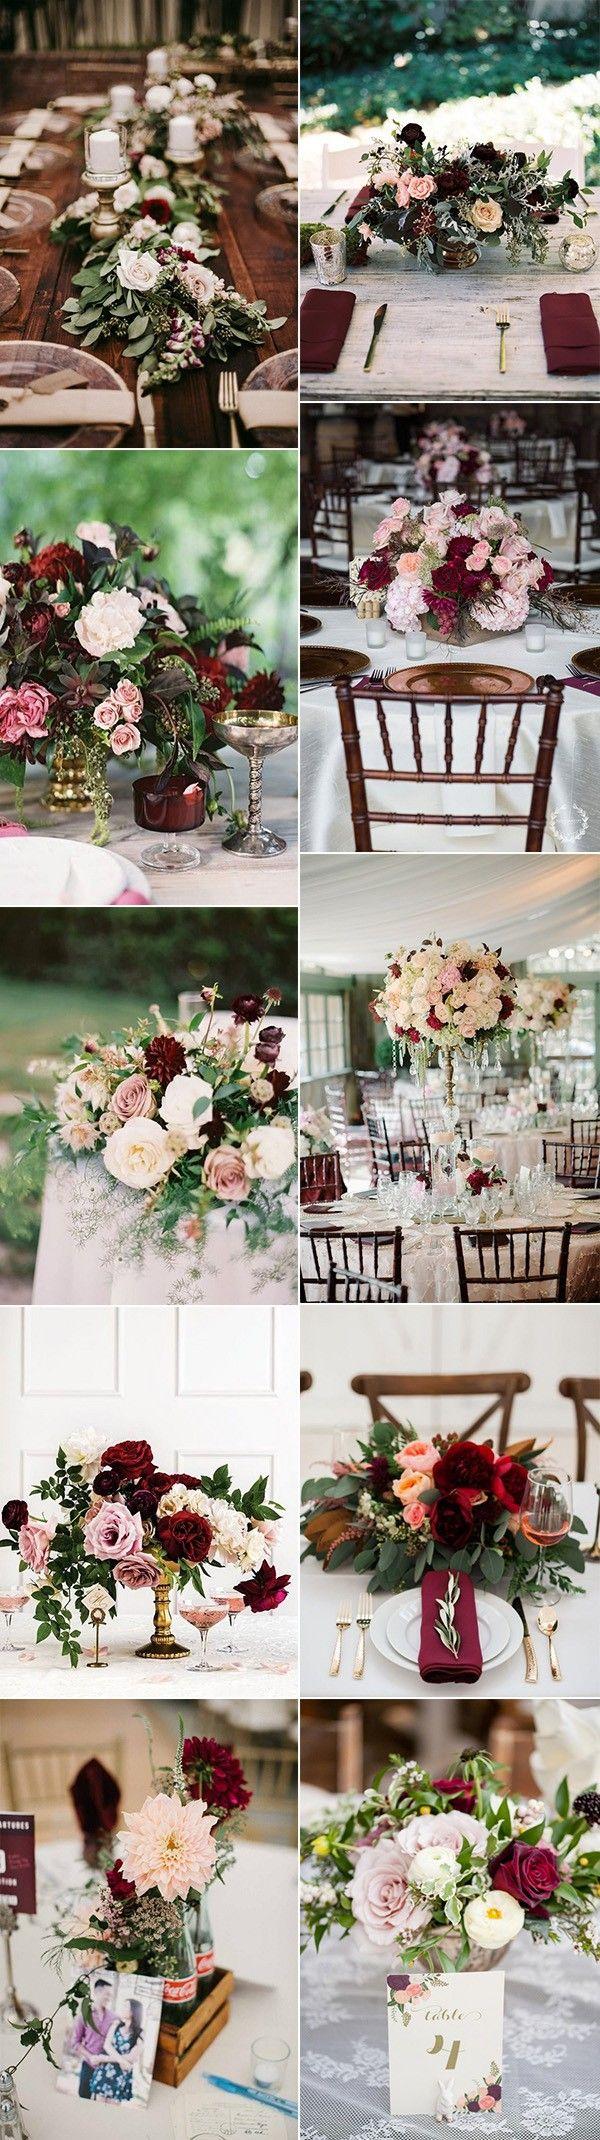 Wedding - Trending-10 Burgundy And Blush Wedding Centerpieces For 2018